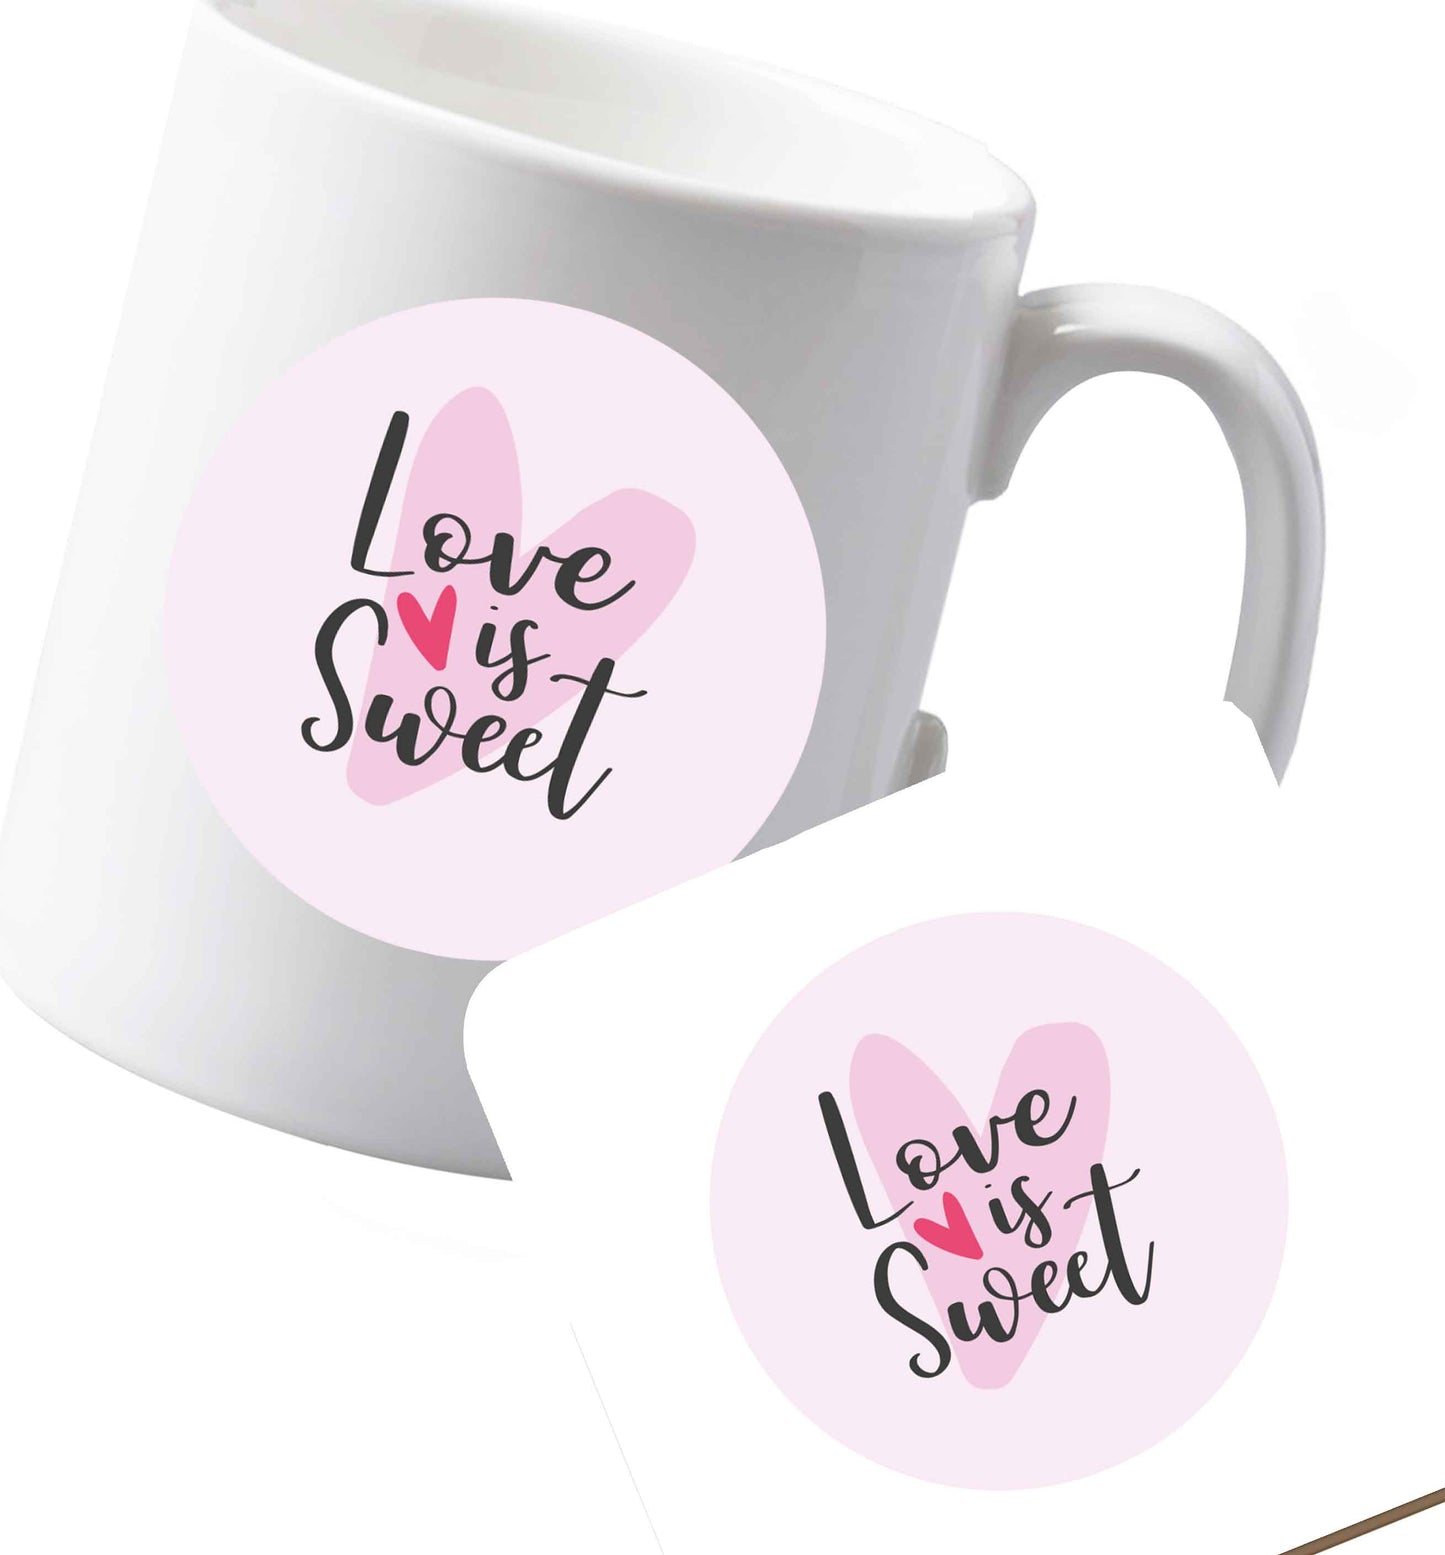 10 oz Ceramic mug and coaster Love really does make the world go round! Ideal for weddings, valentines or just simply to show someone you love them!    both sides